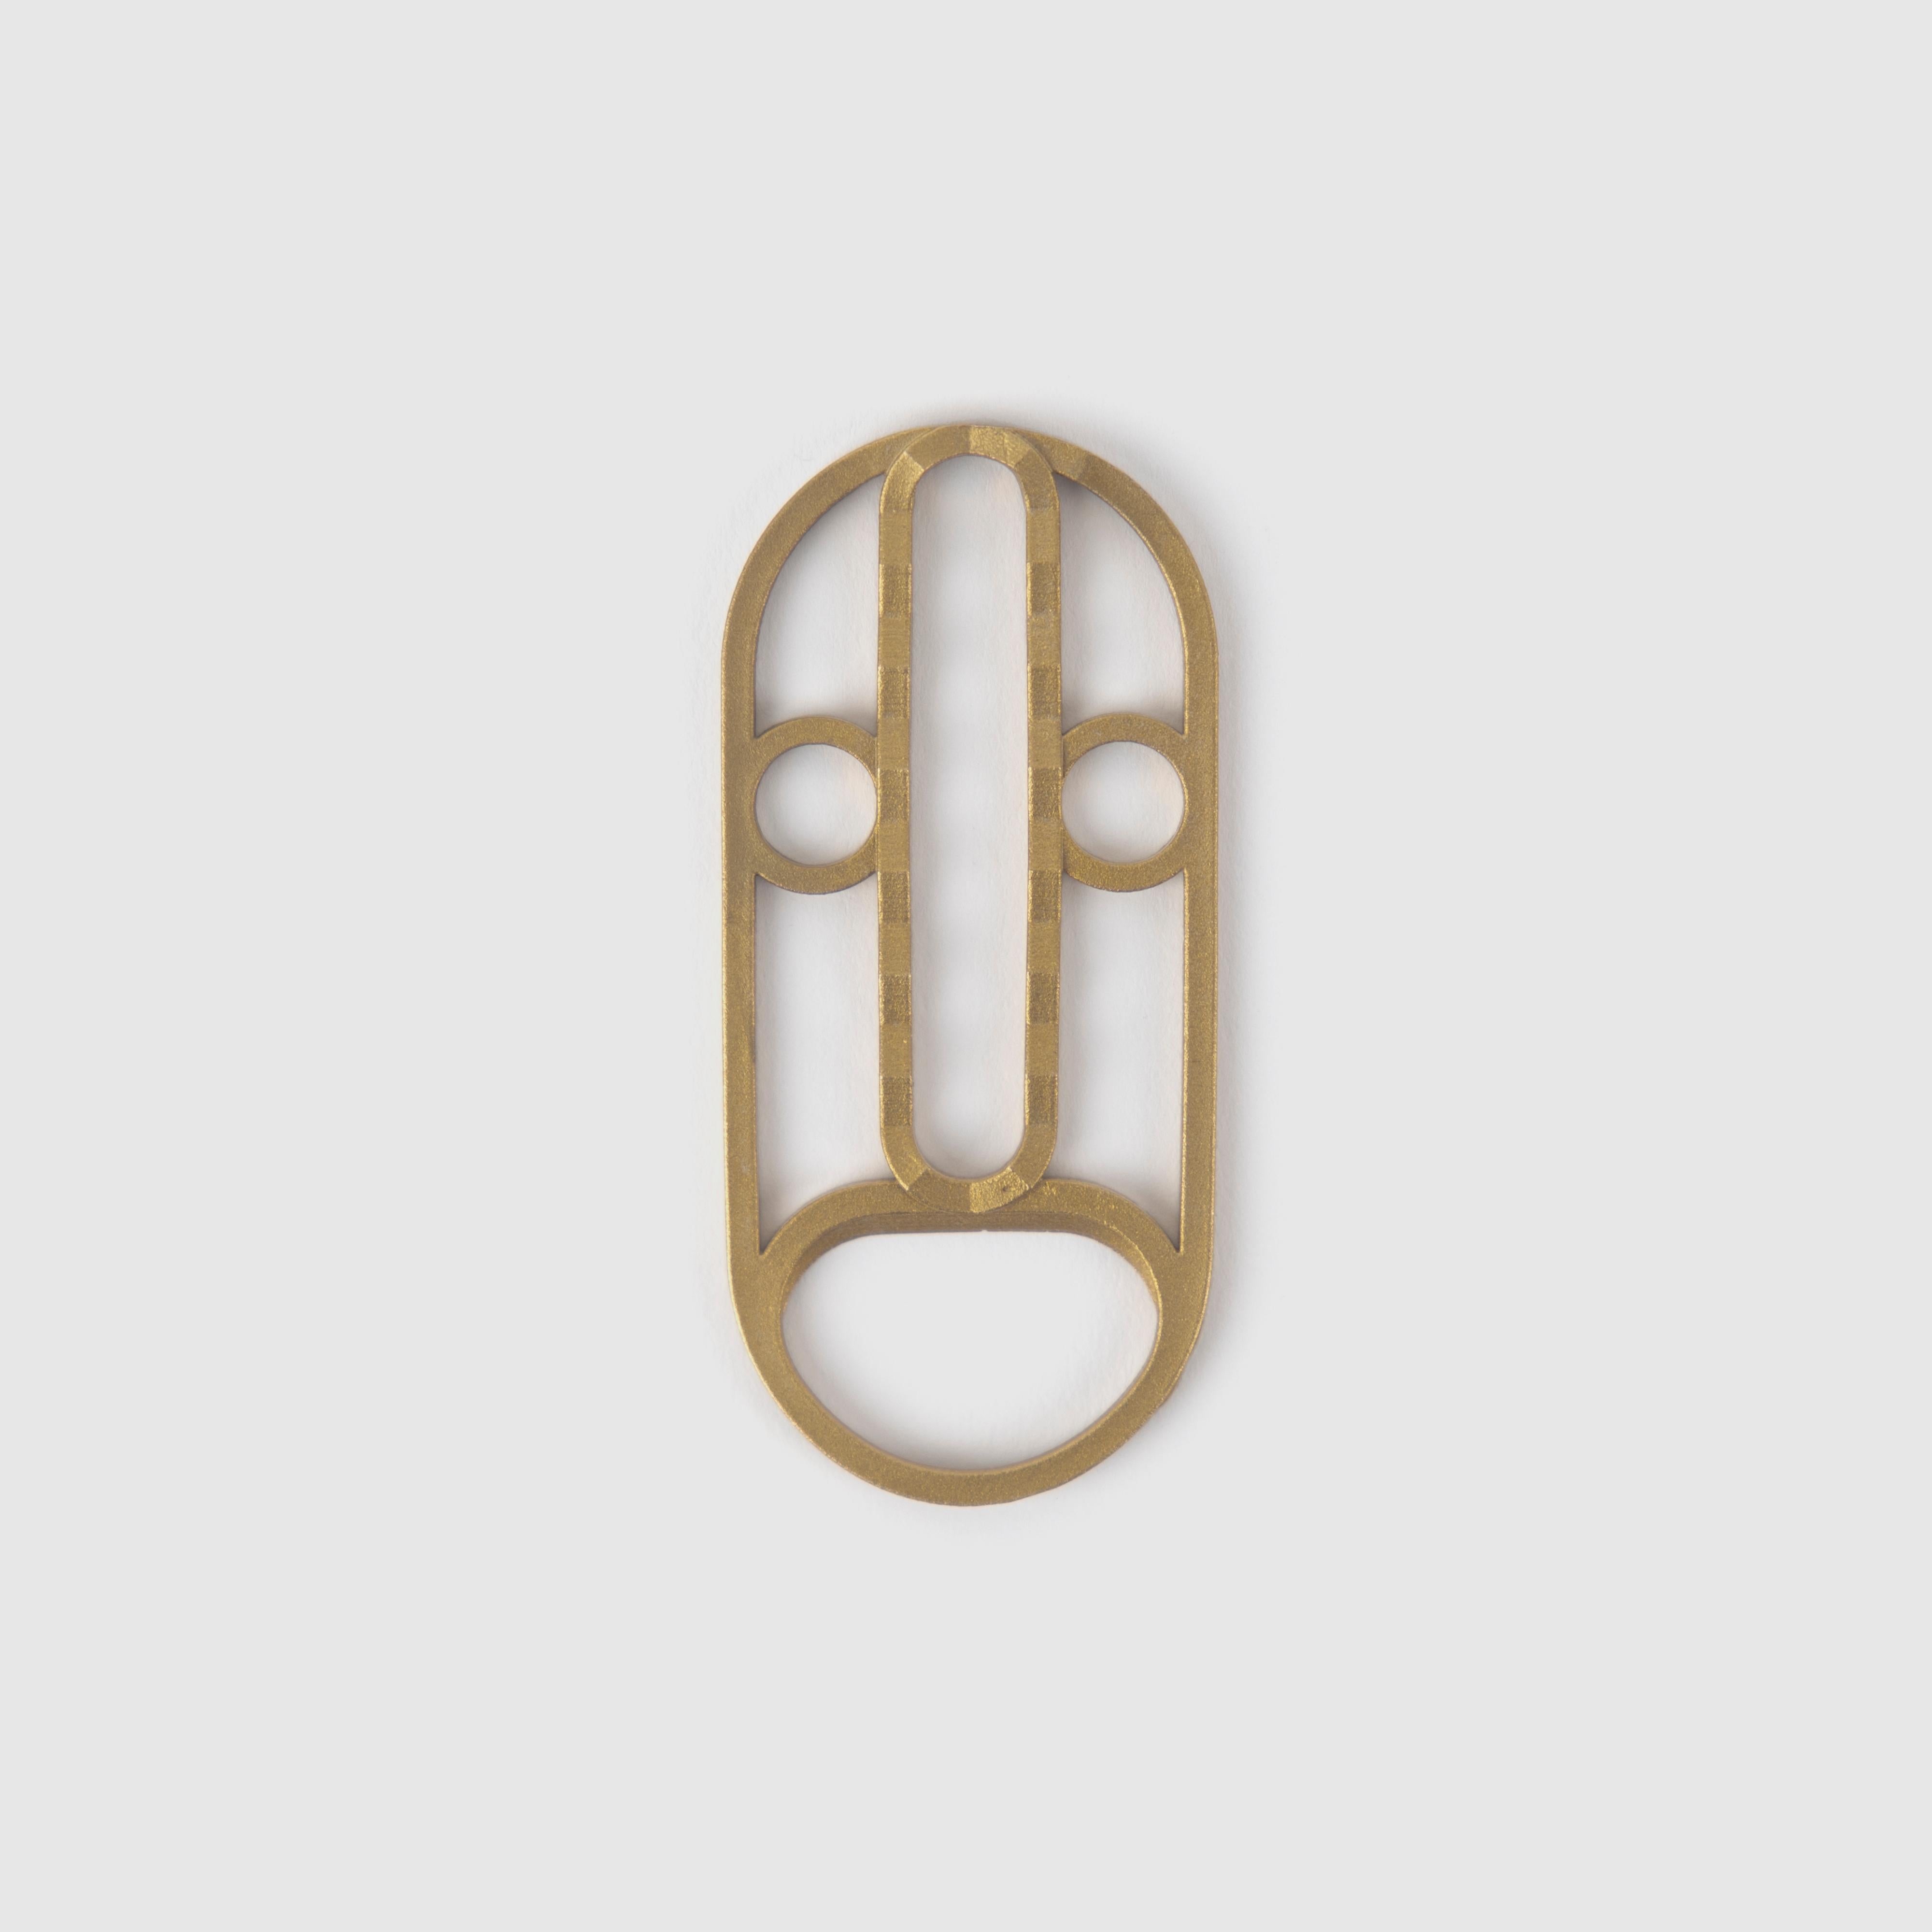 Ali & Ayse bottle openers are inspired by Istanbulites, wandering and having fun on the streets of the city. Taking cues from local people, they are named with typical Turkish names following a similar manner.
Designed with a playful approach to on